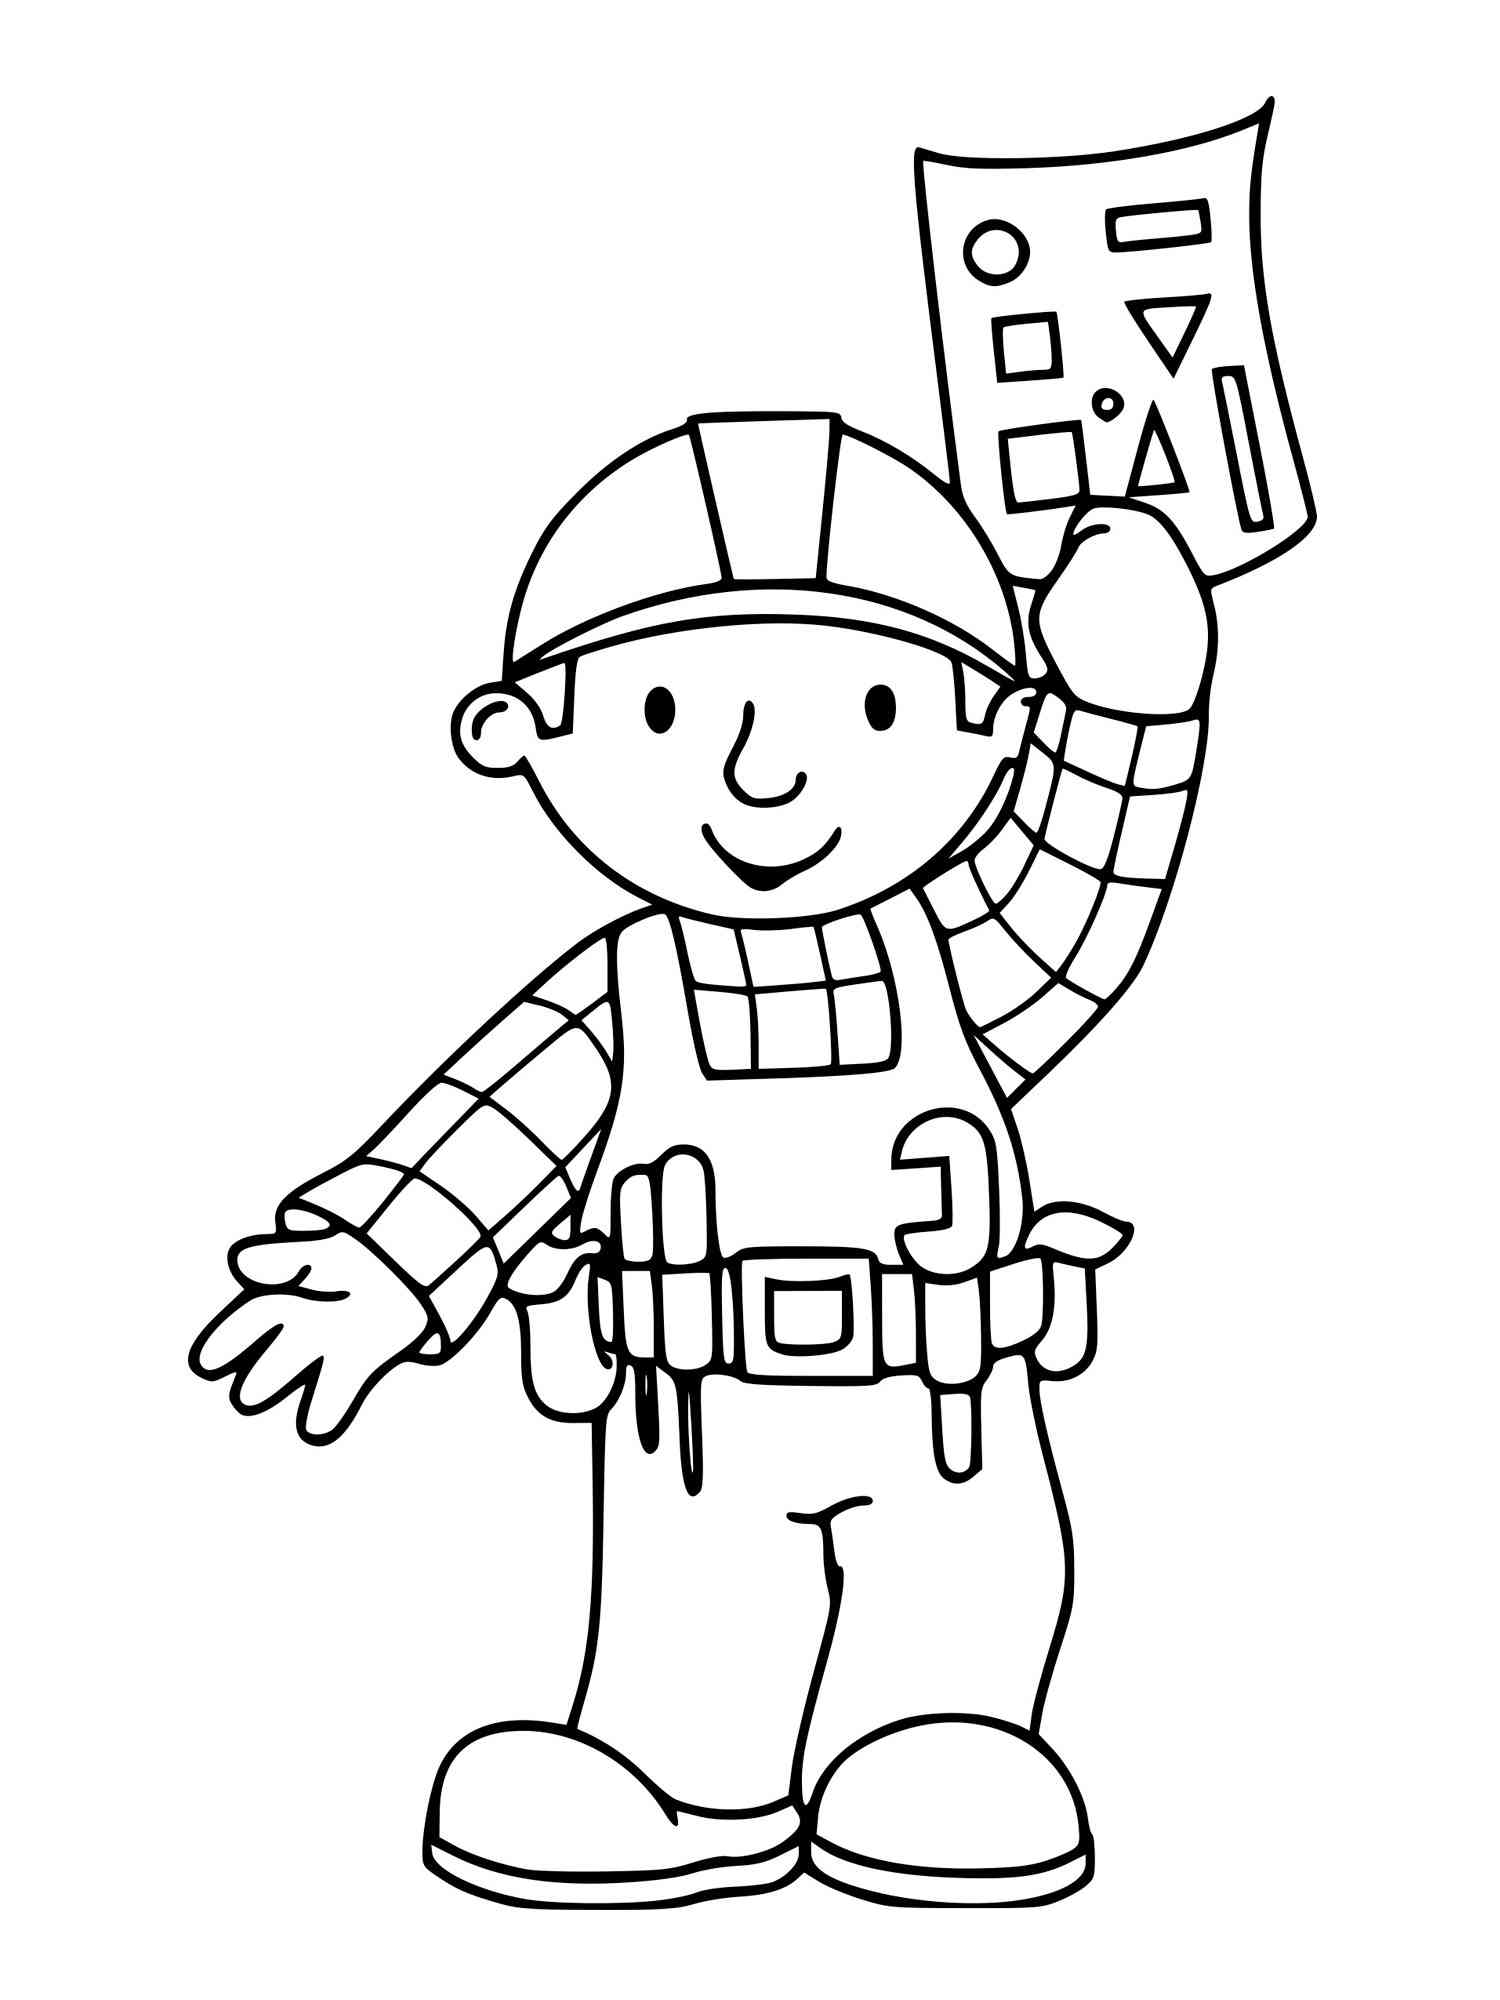 Bob The Builder 49 coloring page